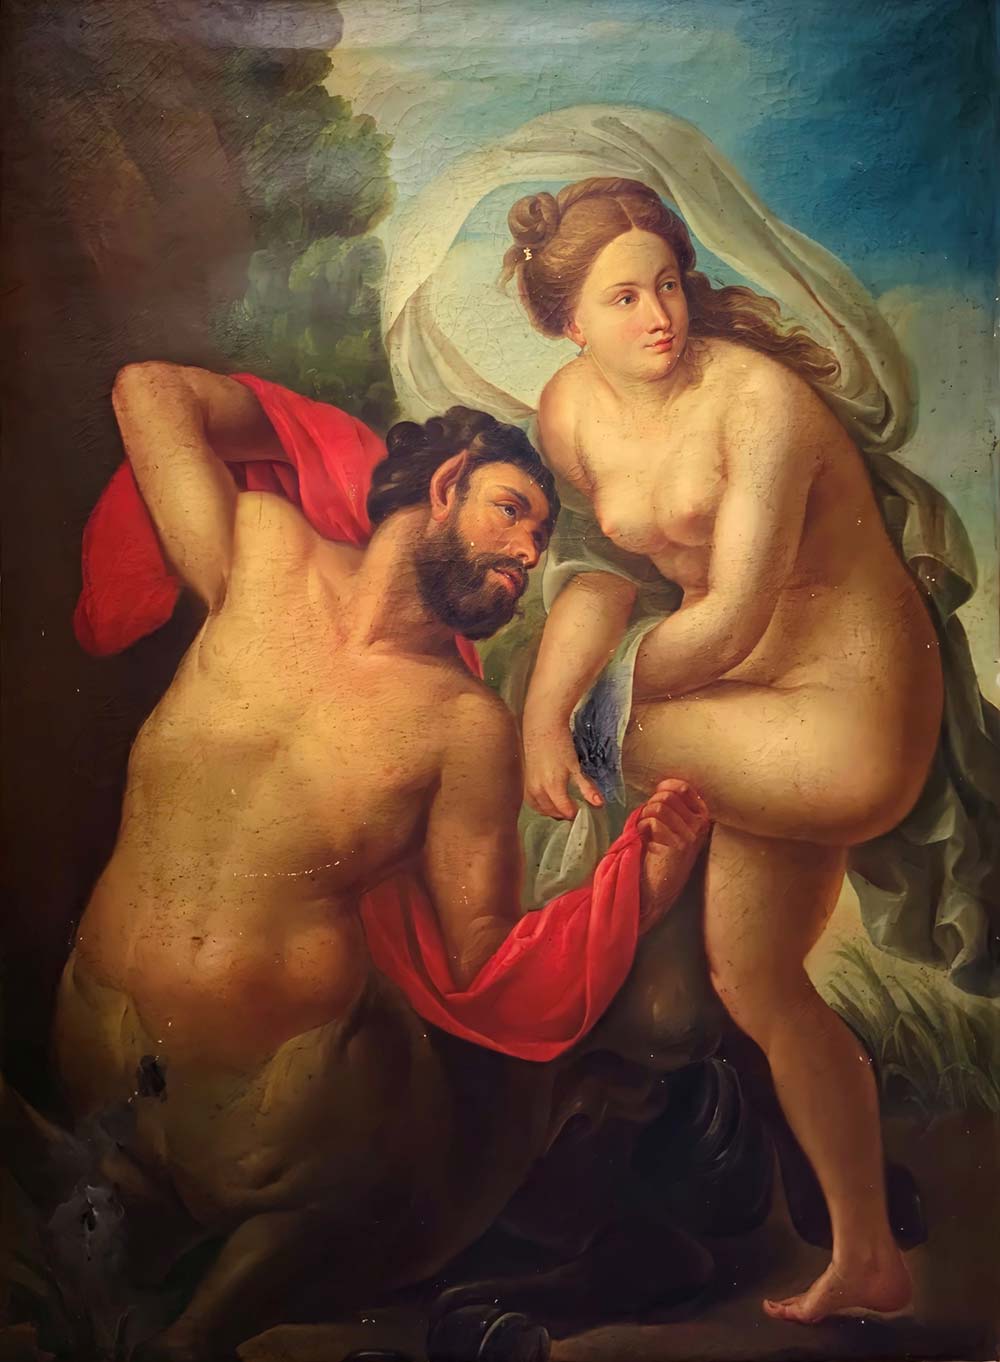 Oil paint on canvas depicting Satyr and Nymph, Emilian painter from the eighteenth century. Cm